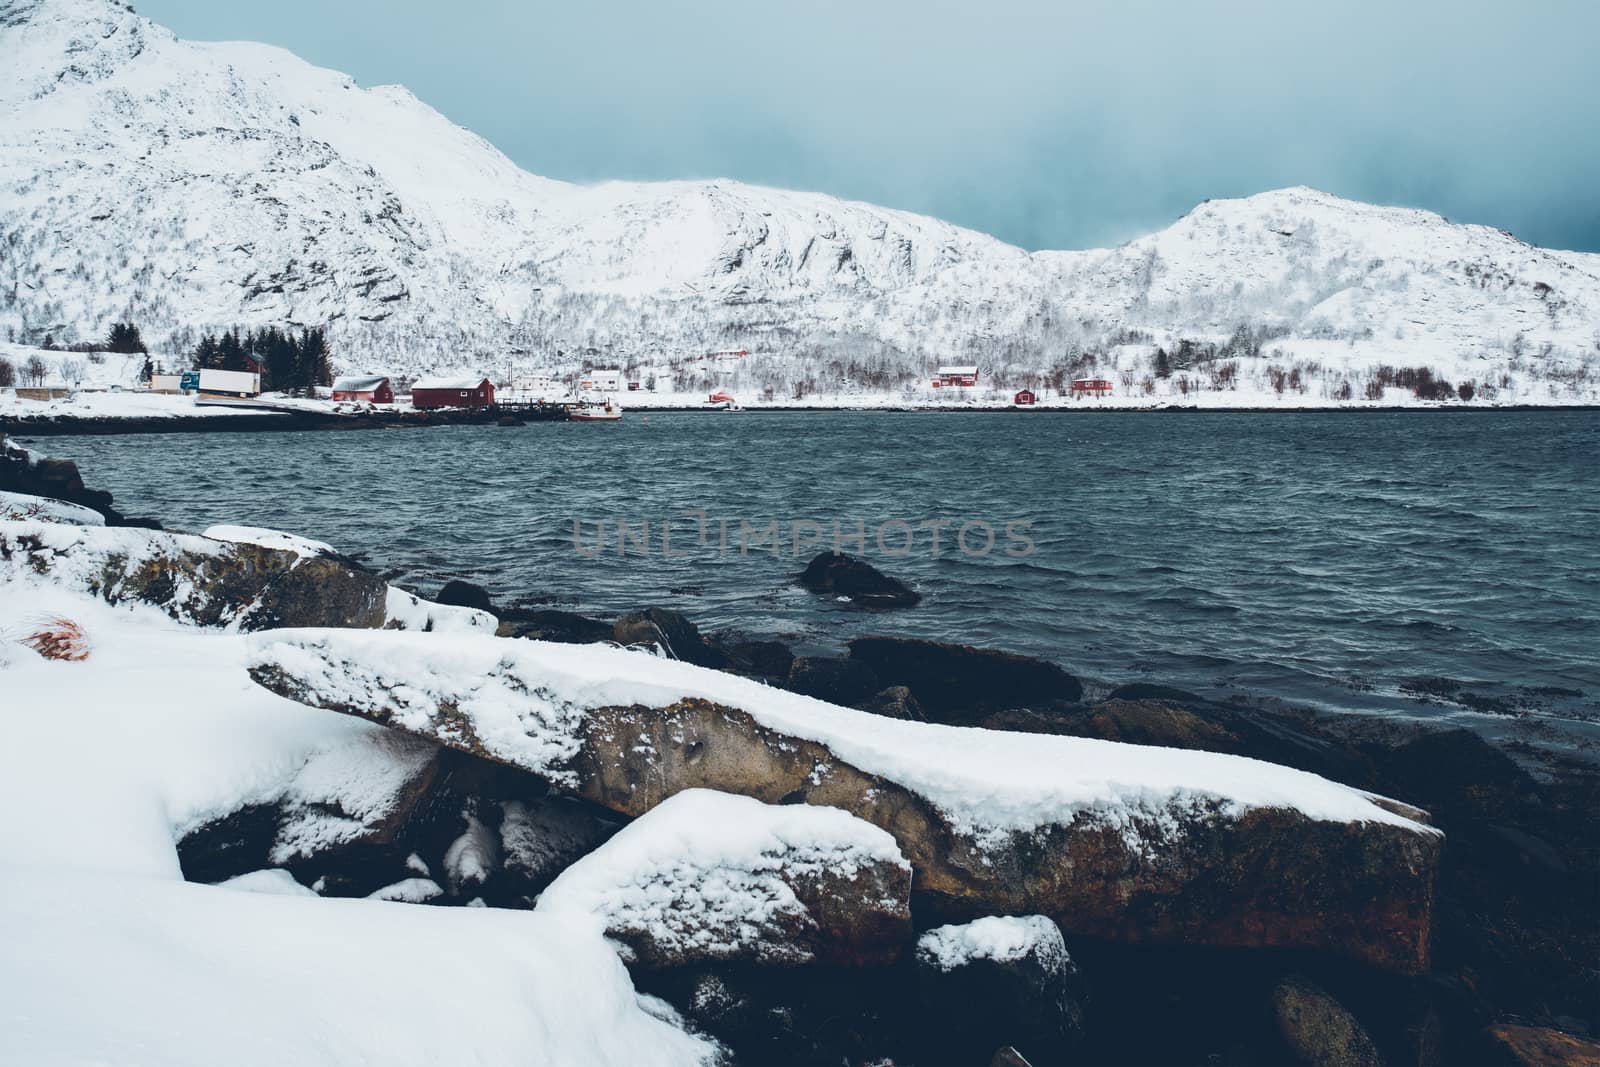 Norwegian fjord with red rorbu houses in Norway in winter by dimol